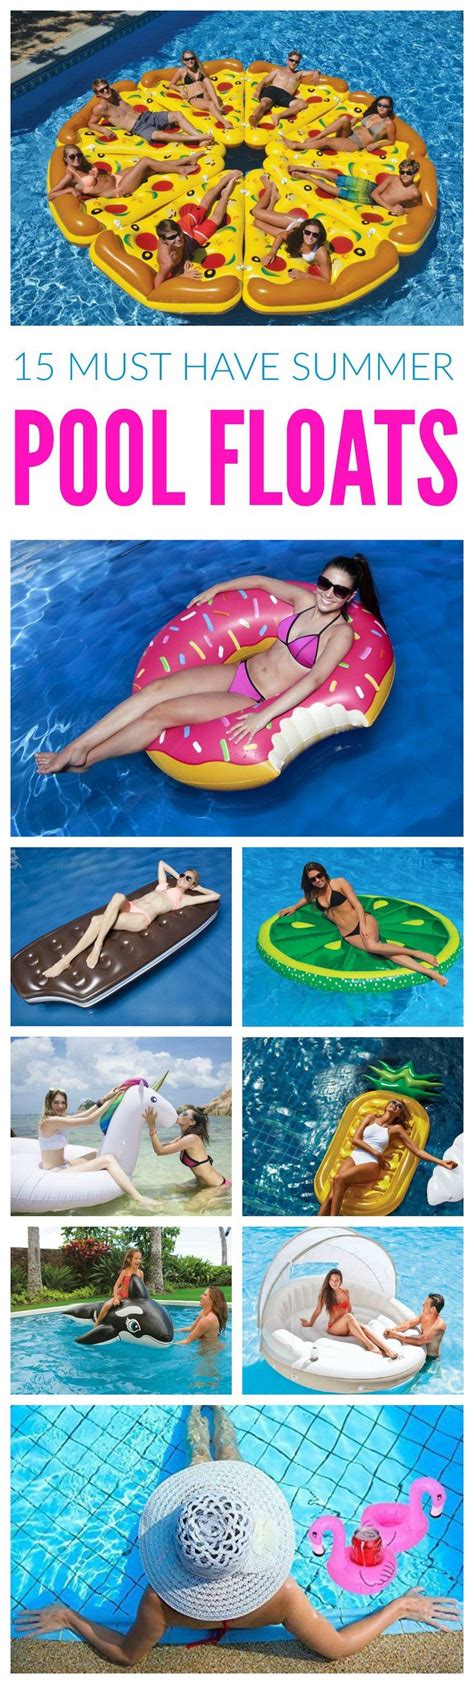 15 Must Have Summer Pool Floats Pool Floats Crazy Pool Floats